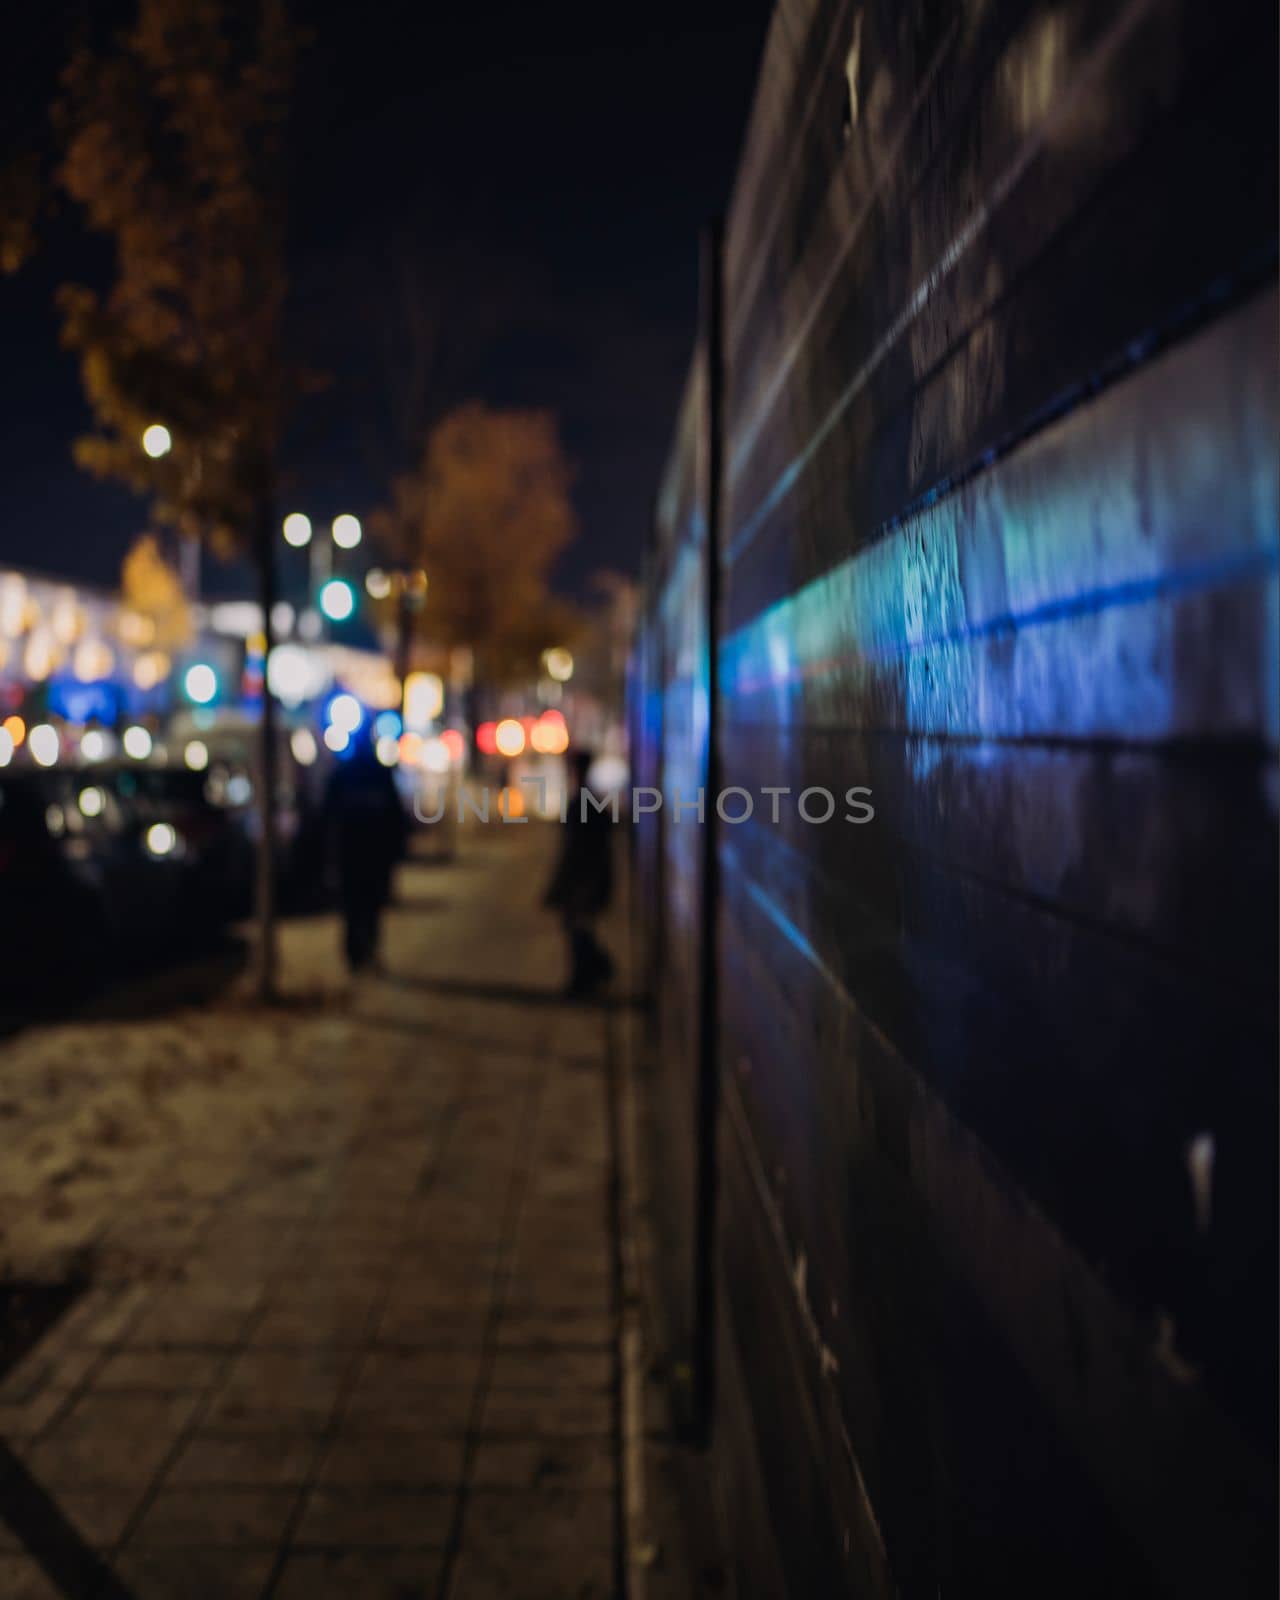 Abstract concept of Blue and red emergency lights in background reflecting on street metal wall. Boys in silhouette discussing what could happen.